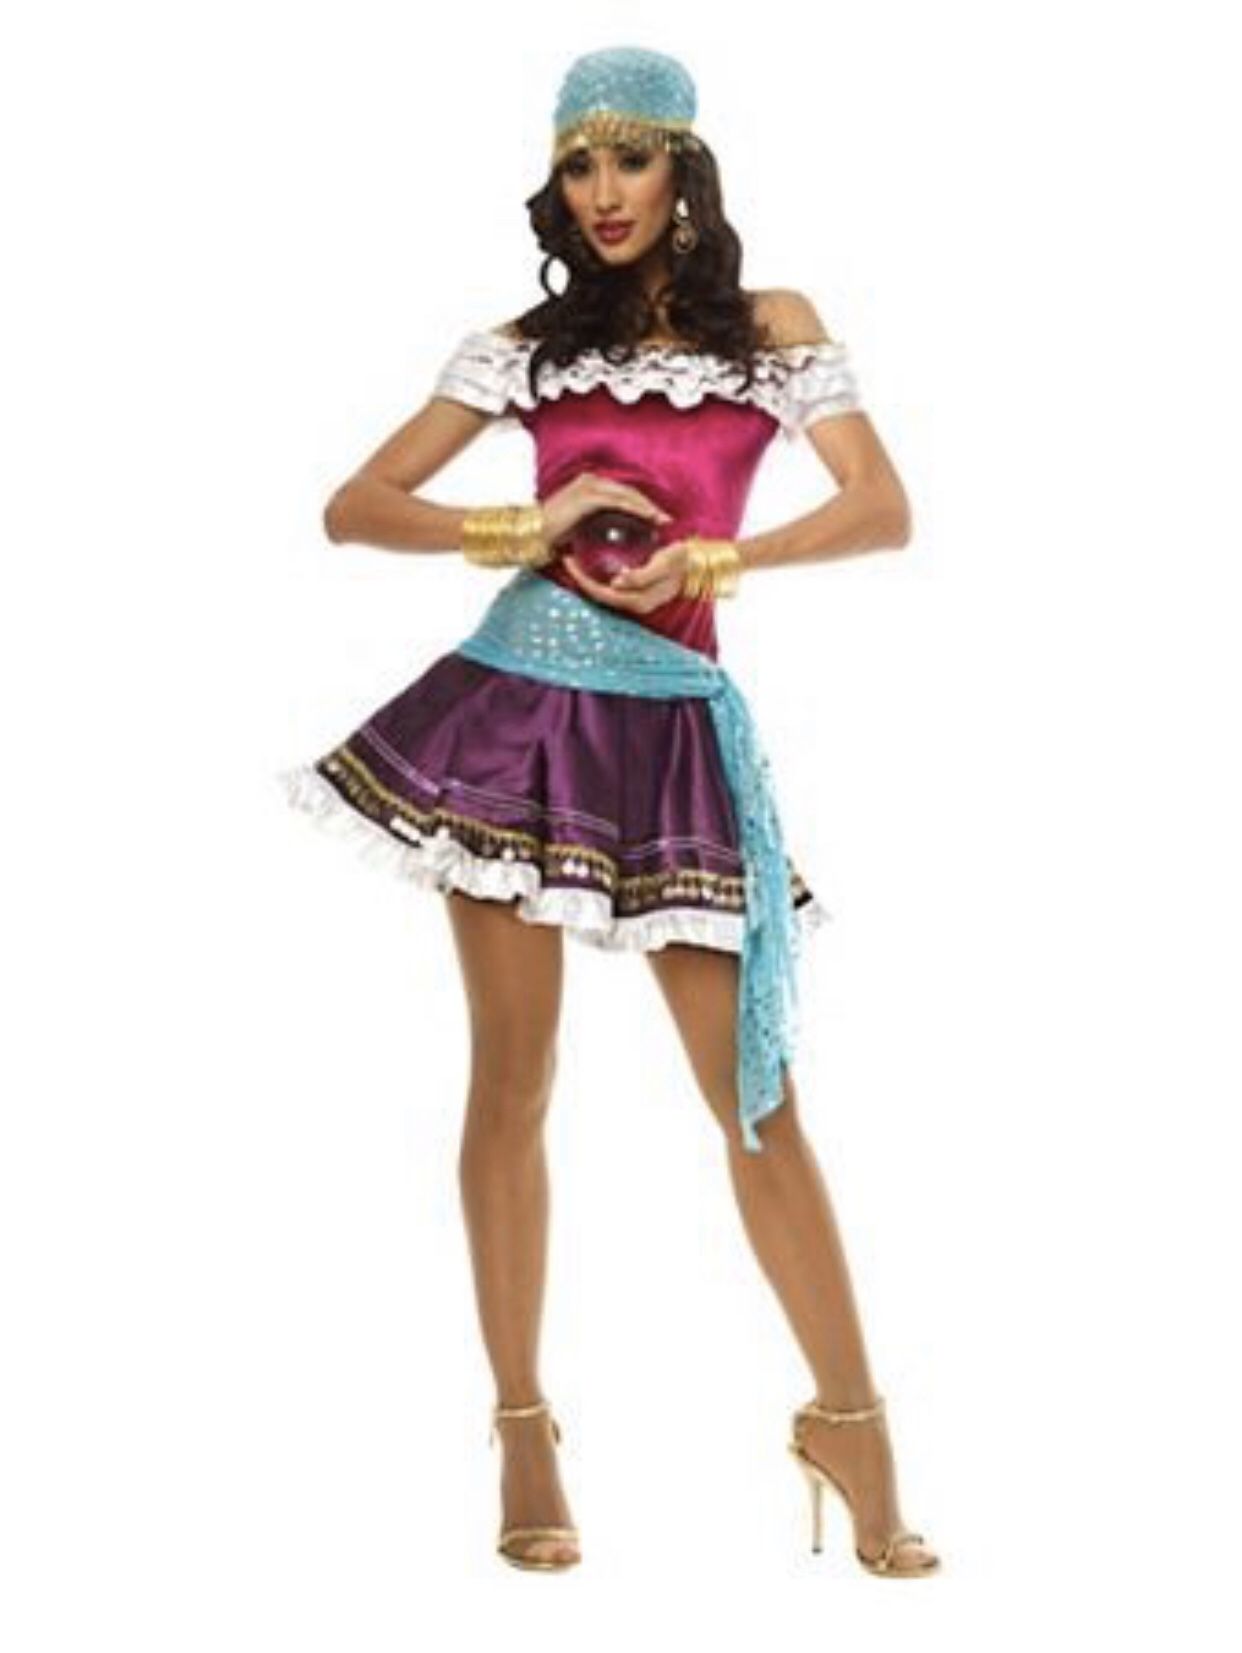 Brand New Women’s Large Fortune Teller Gypsy Dress & 2 Scarves Complete Halloween Costume